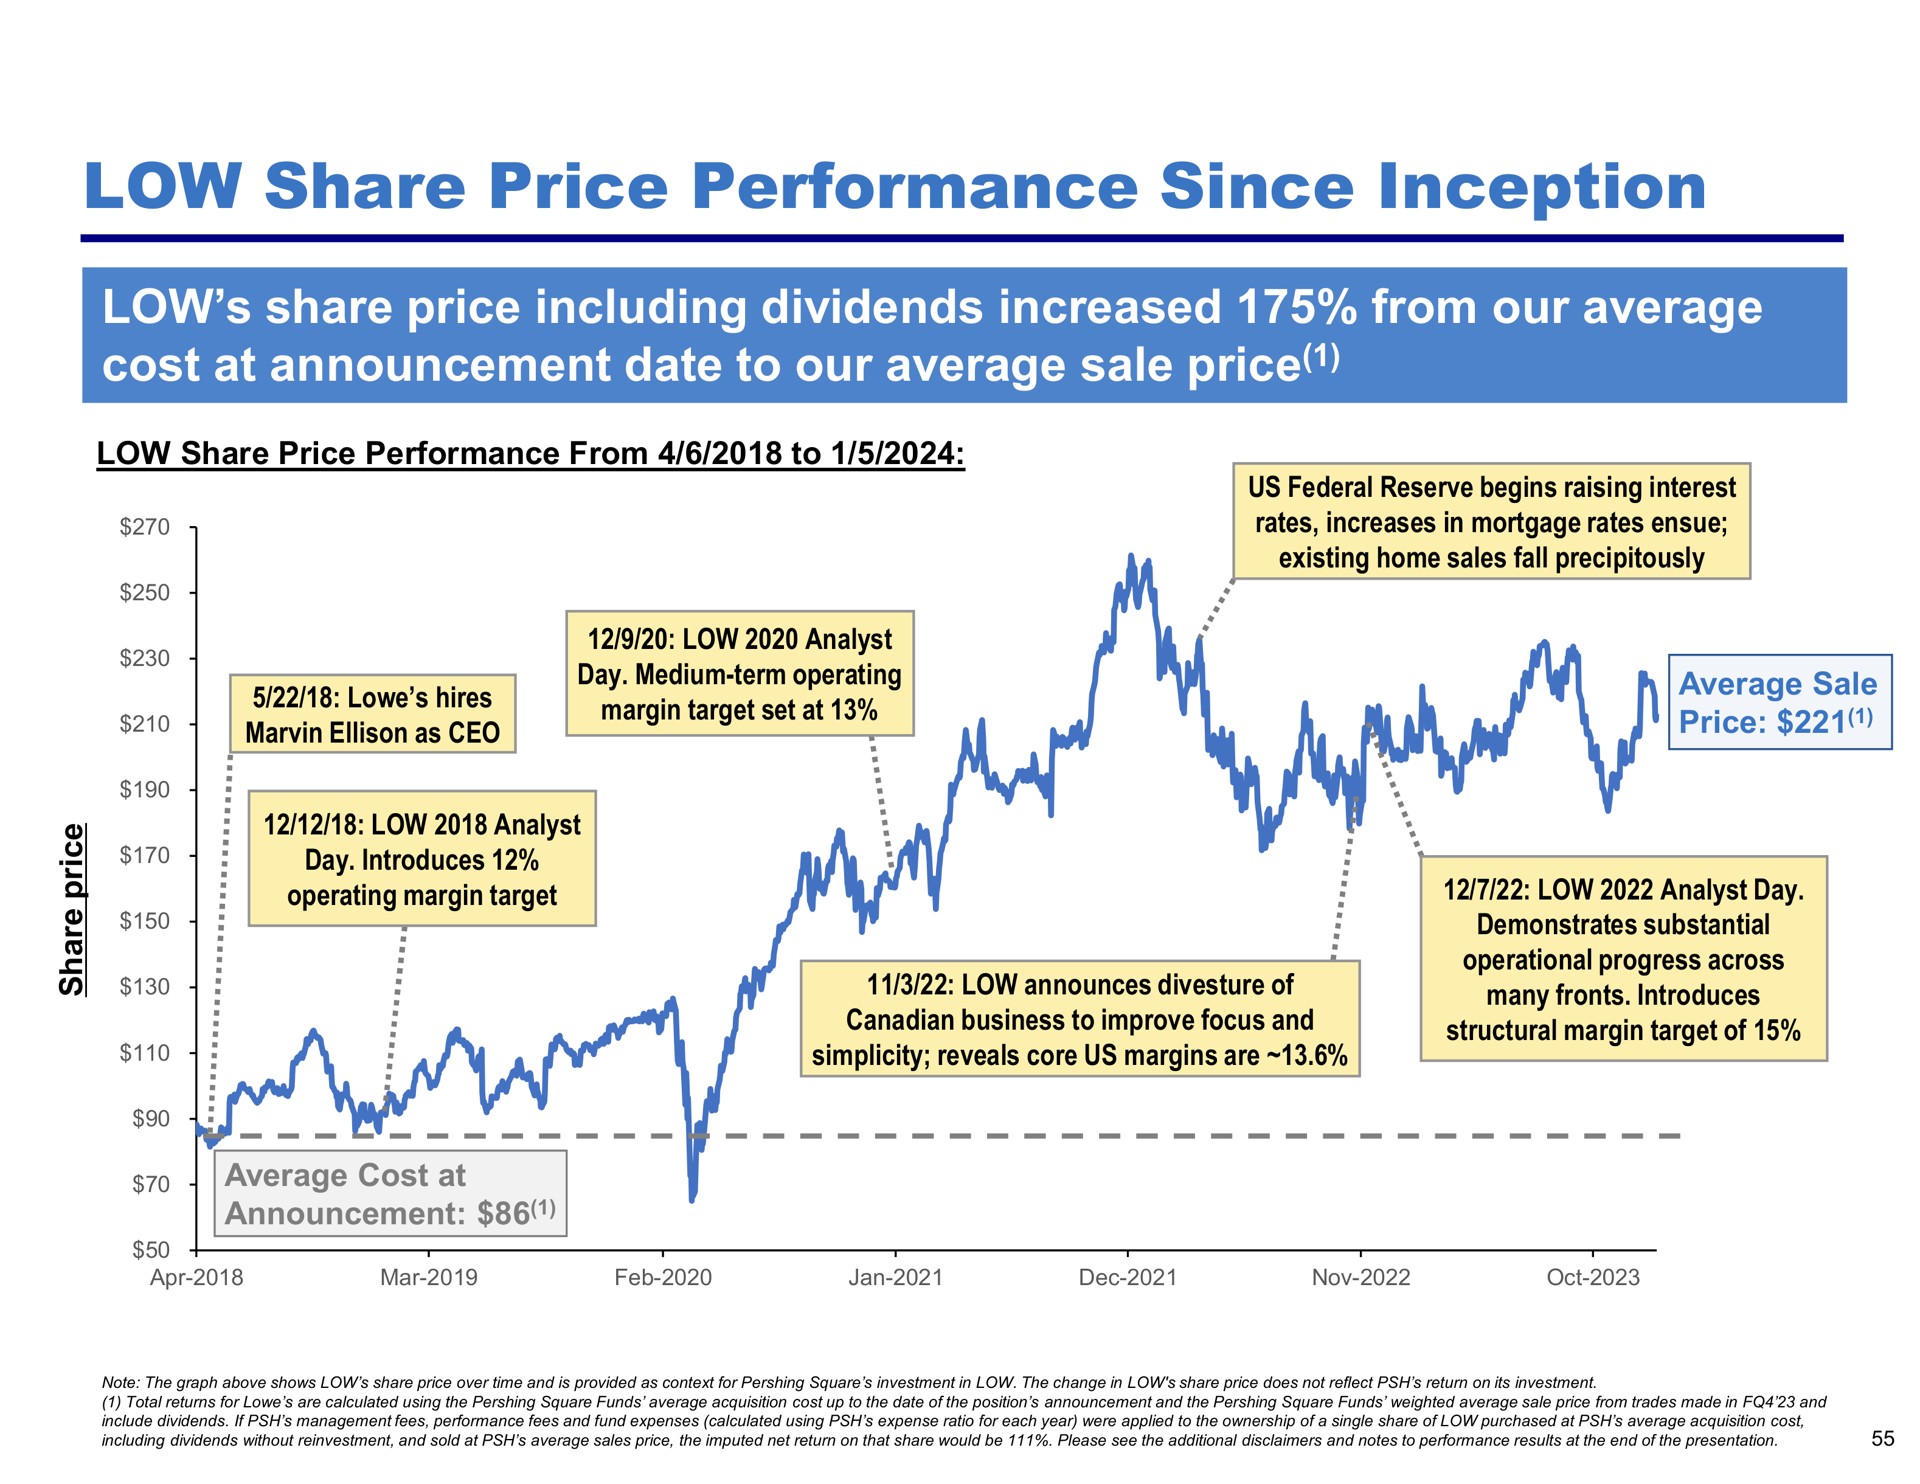 low share price performance since inception low share price including dividends increased from our average cost at announcement date to our average sale price | Pershing Square